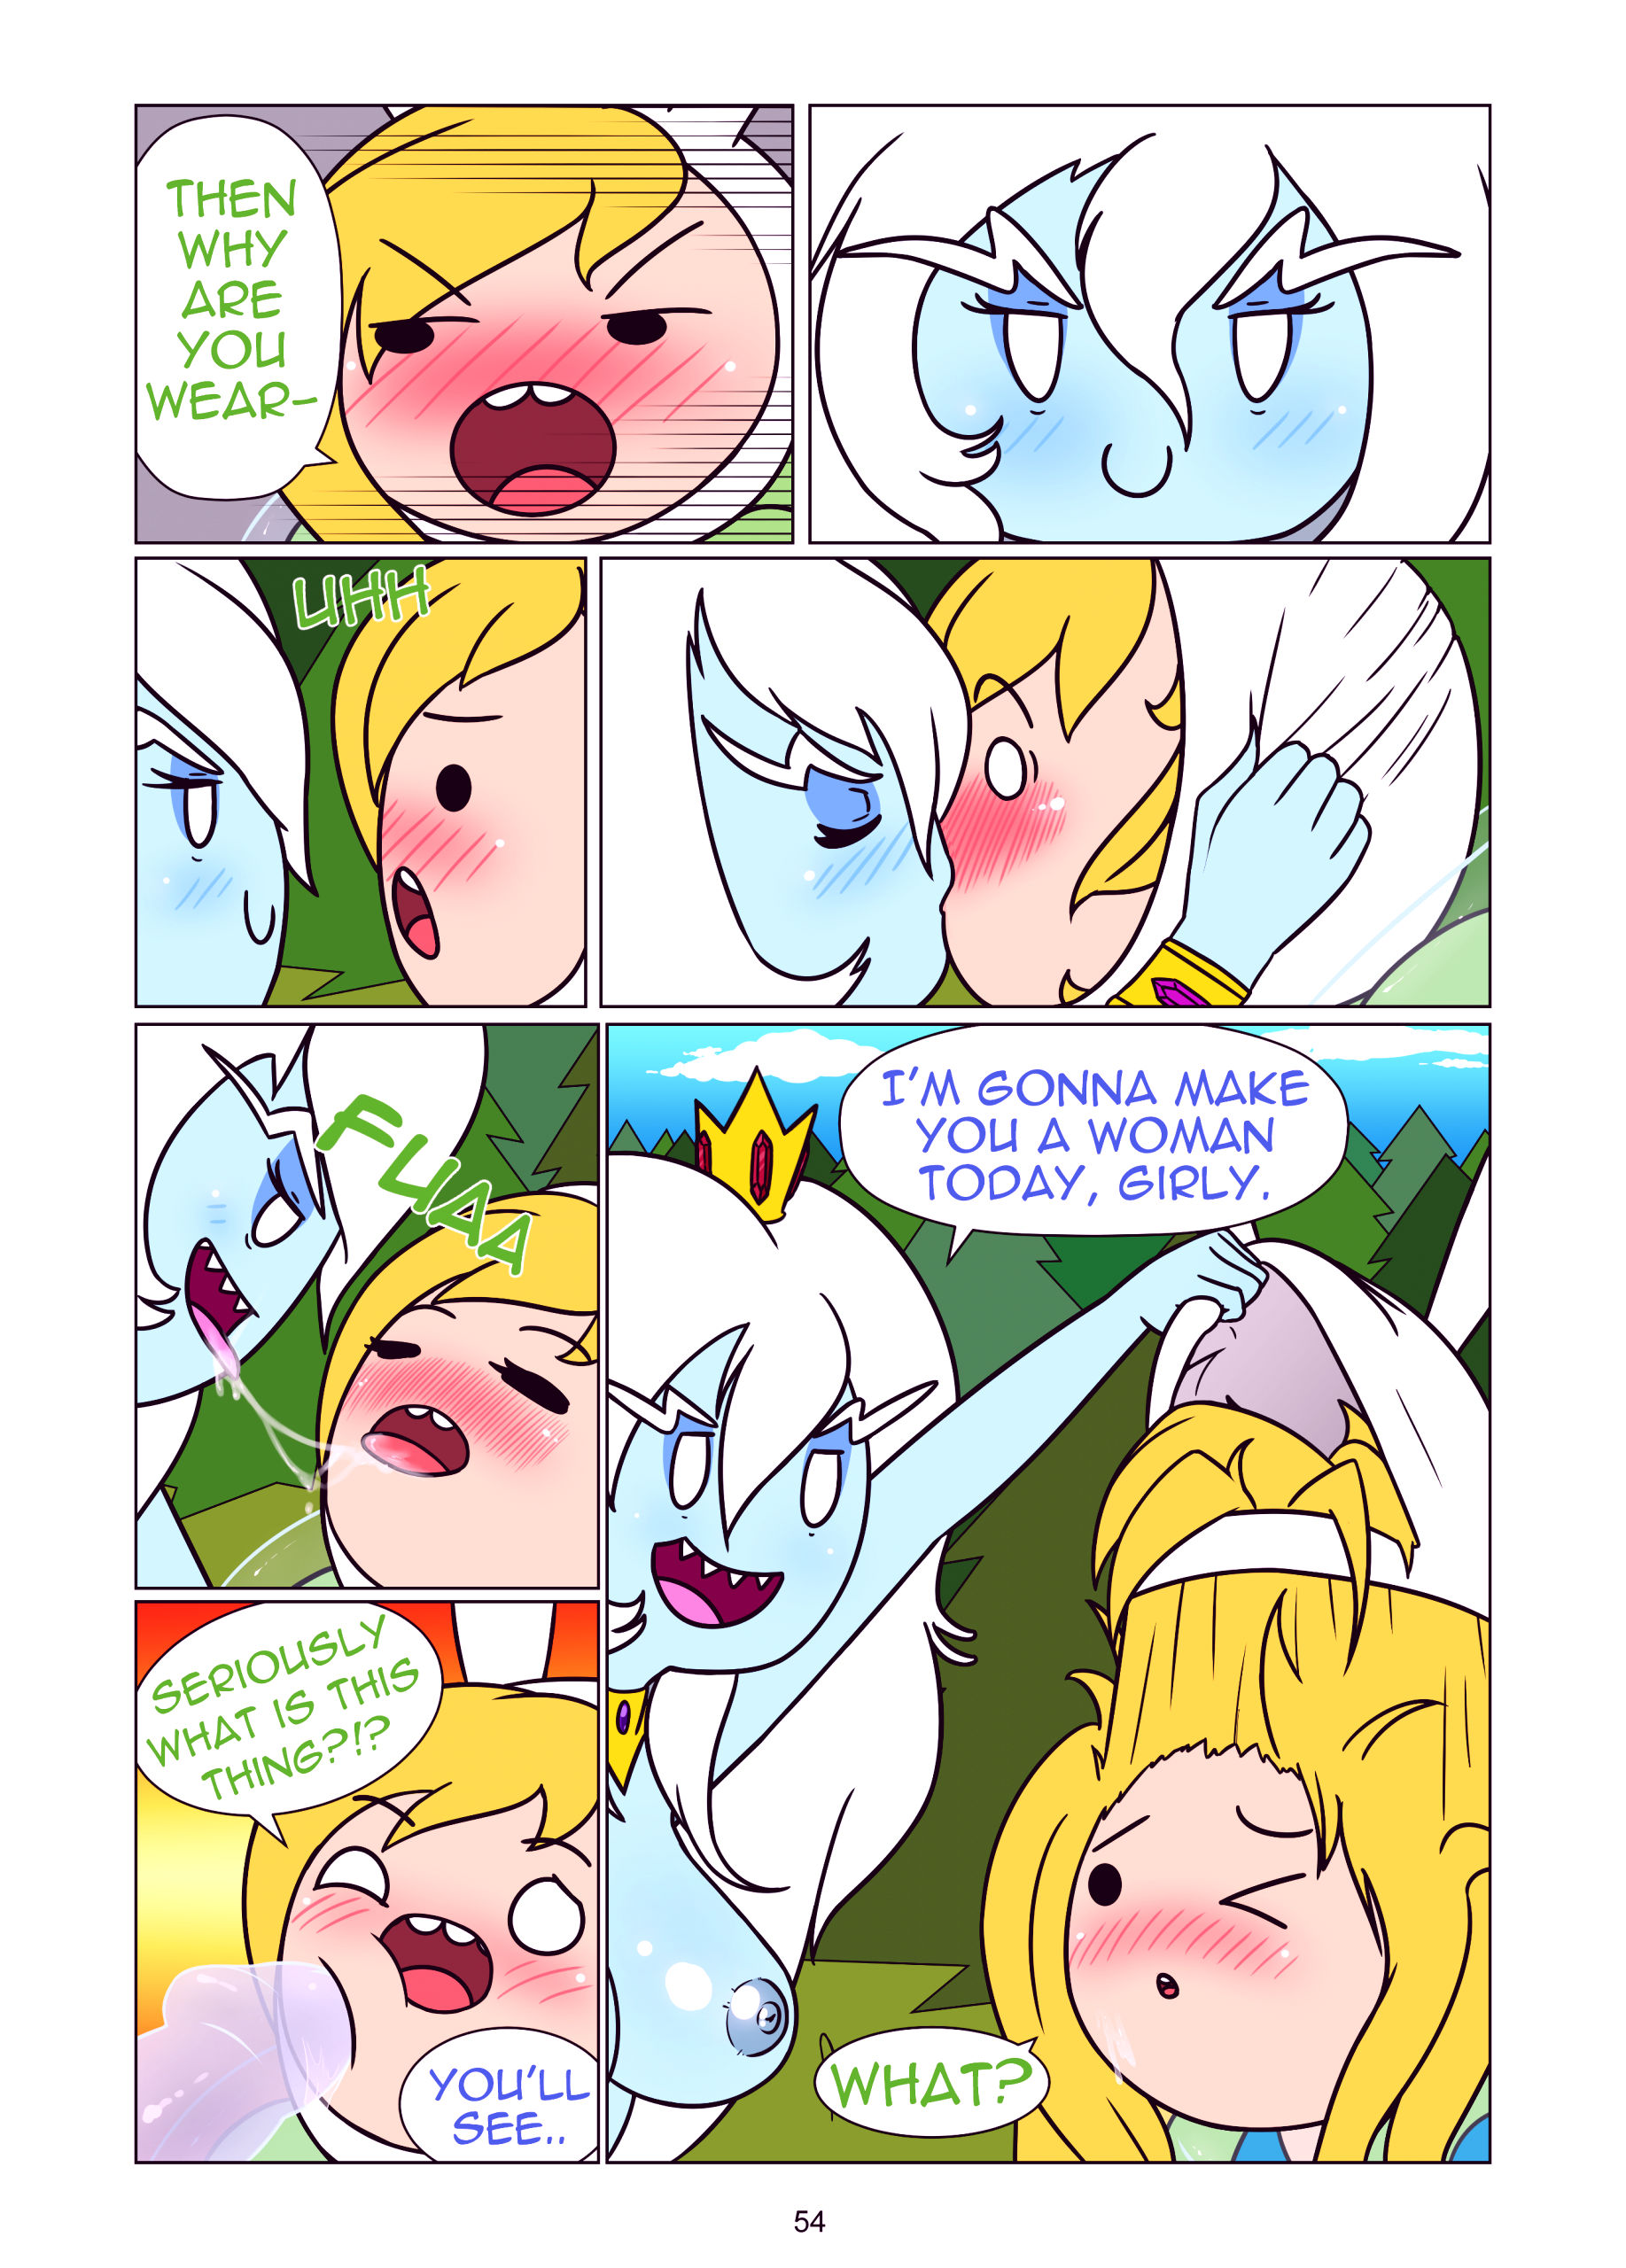 Misadventure time the collection porn comic picture 55